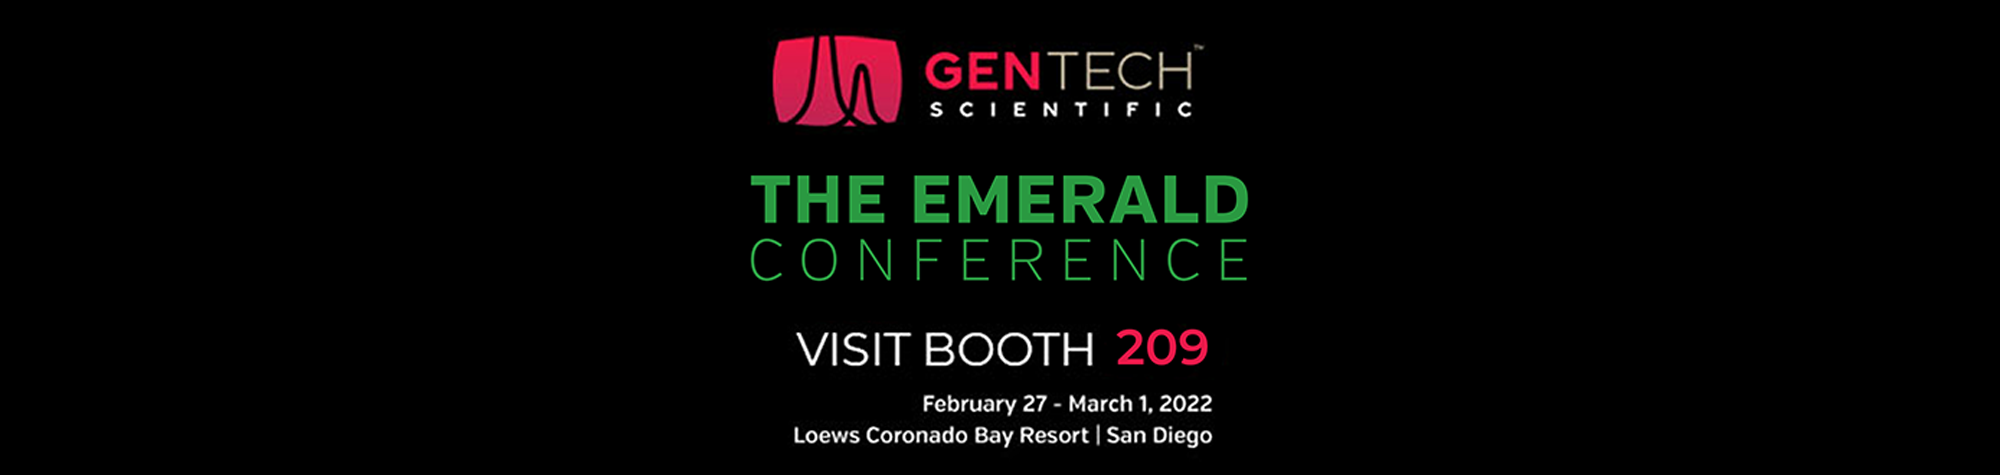 Visit us at The Emerald Conference 2022!